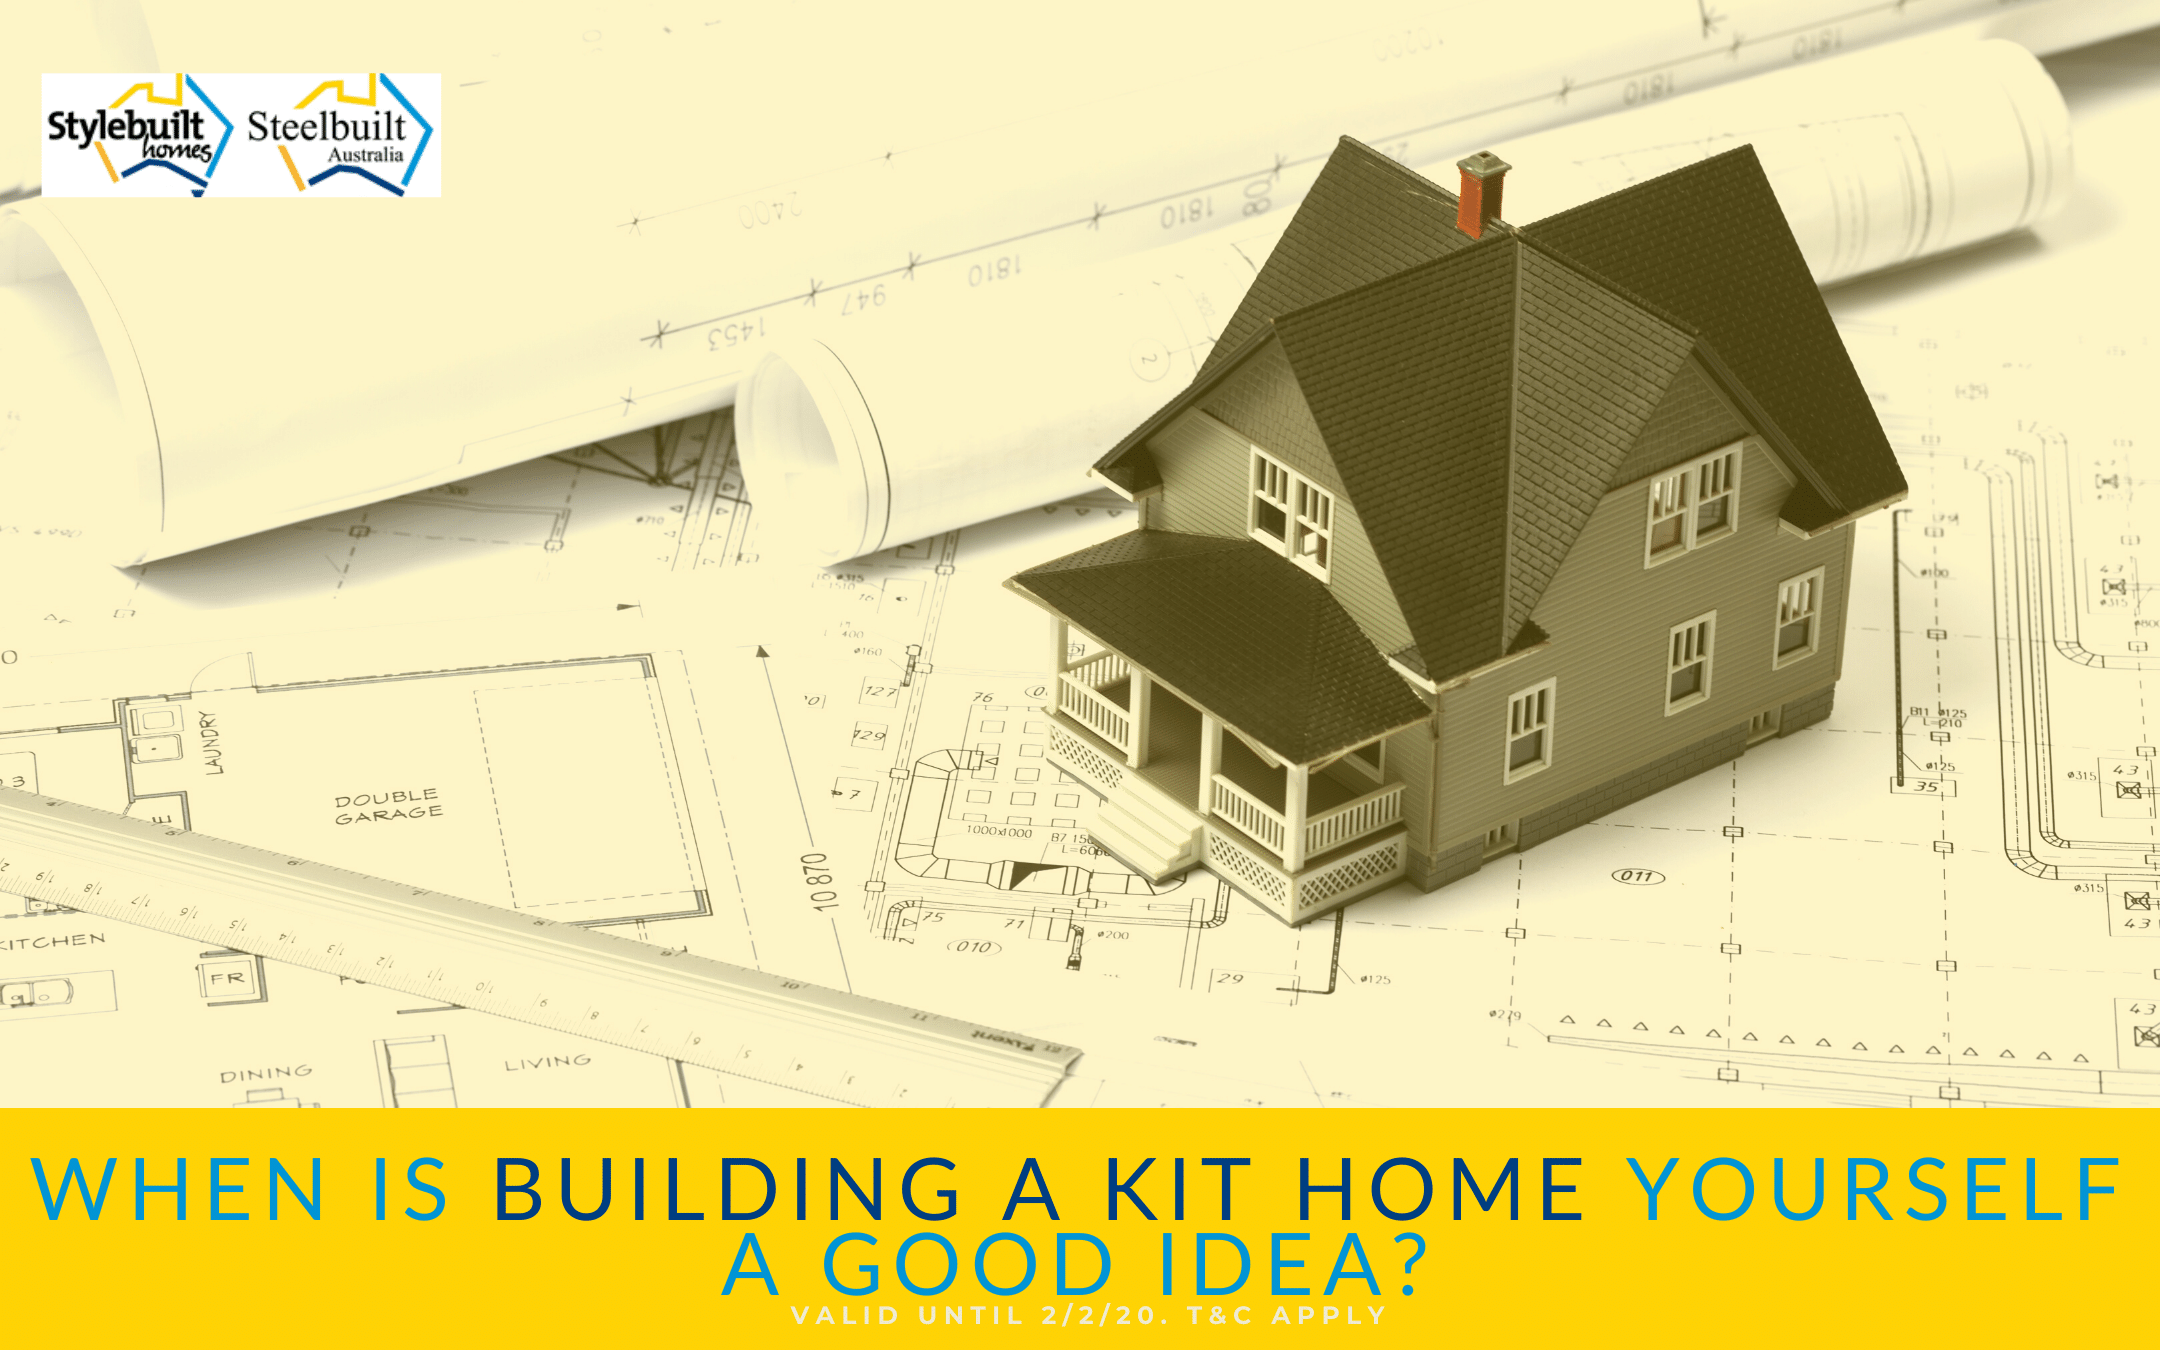 When is Building a Kit Home Yourself a Good Idea?